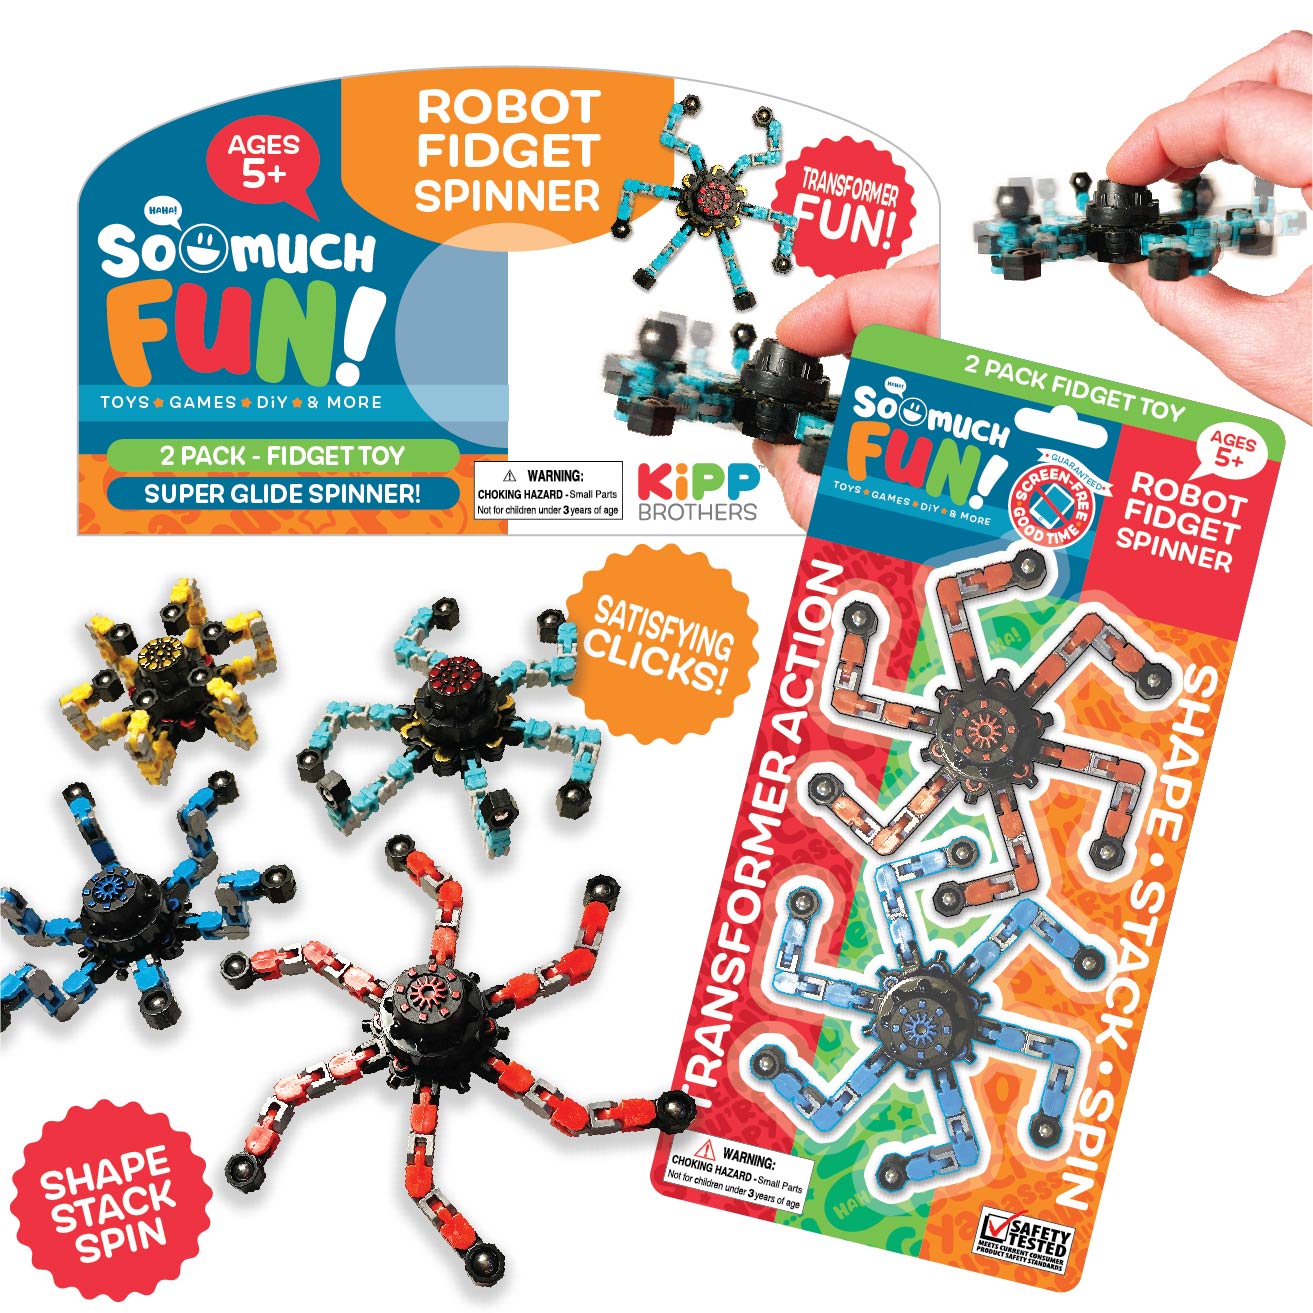 ITEM NUMBER 023023L MICRO ROBOT SPINNER - STORE SURPLUS NO DISPLAY 12 PIECES PER PACK